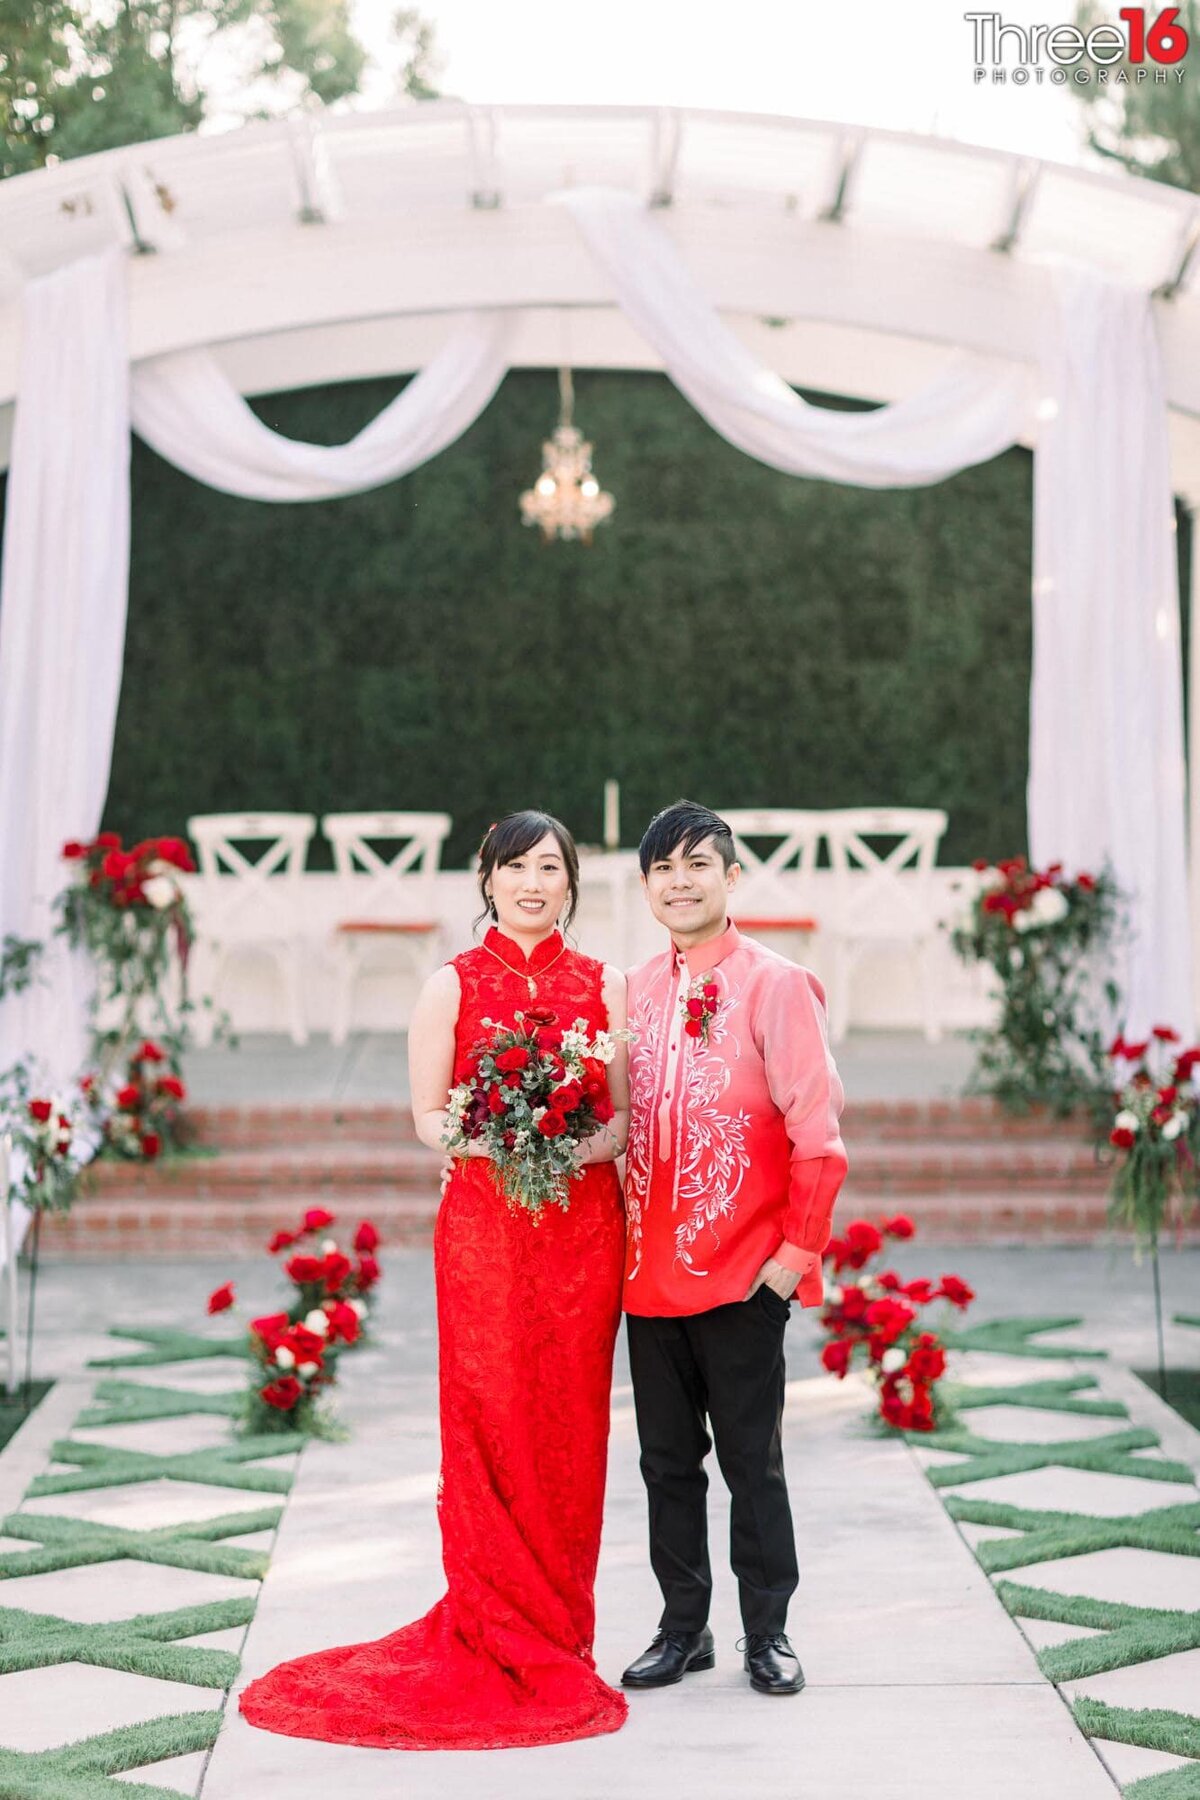 Bride and Groom pose together in red wedding attire